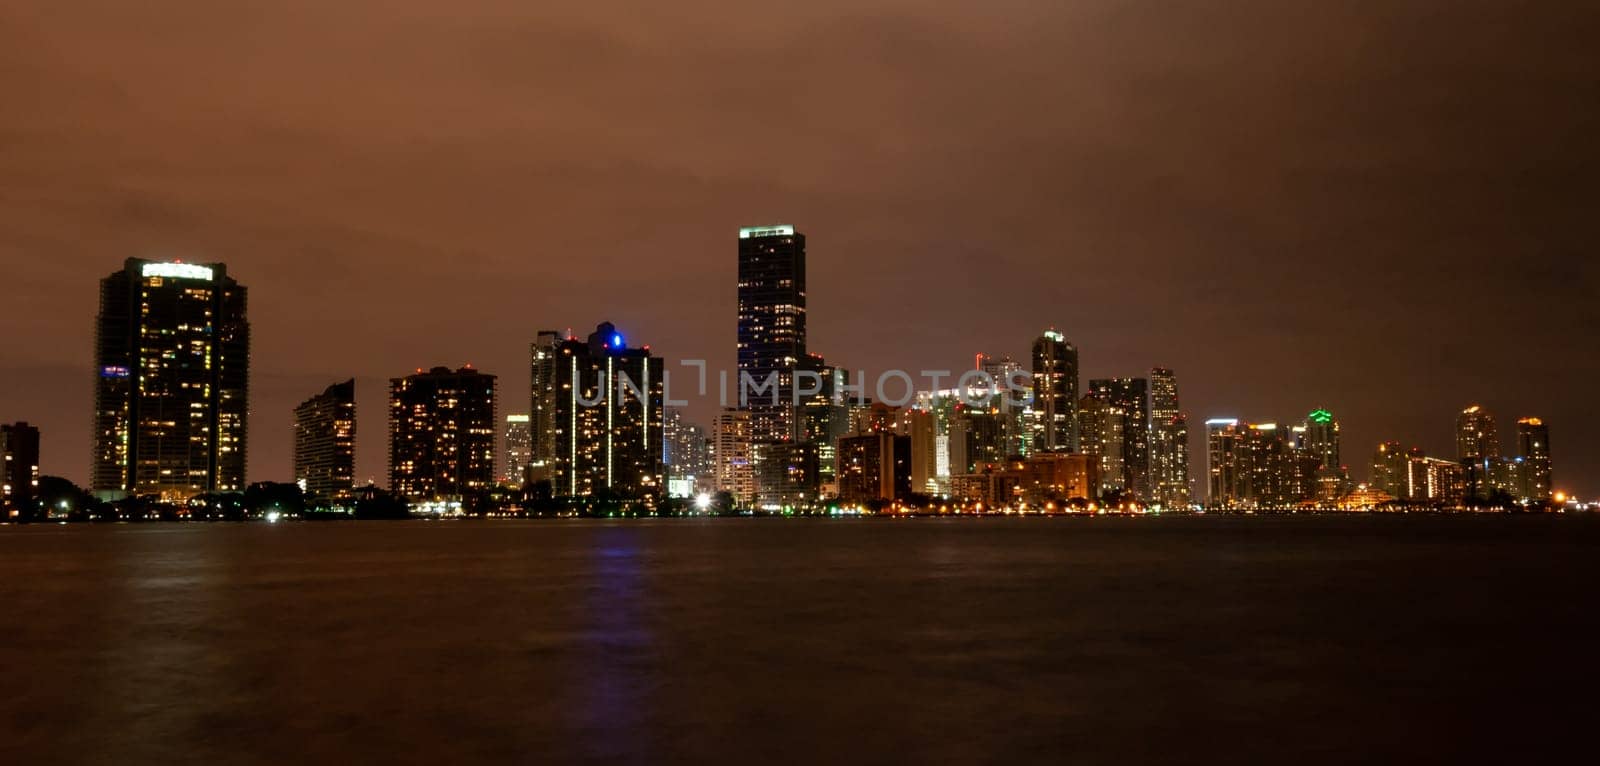 USA, FLORIDA - NOVEMBER 30, 2011: view of the night glowing city on the coast of the Gulf of Mexico, Florida